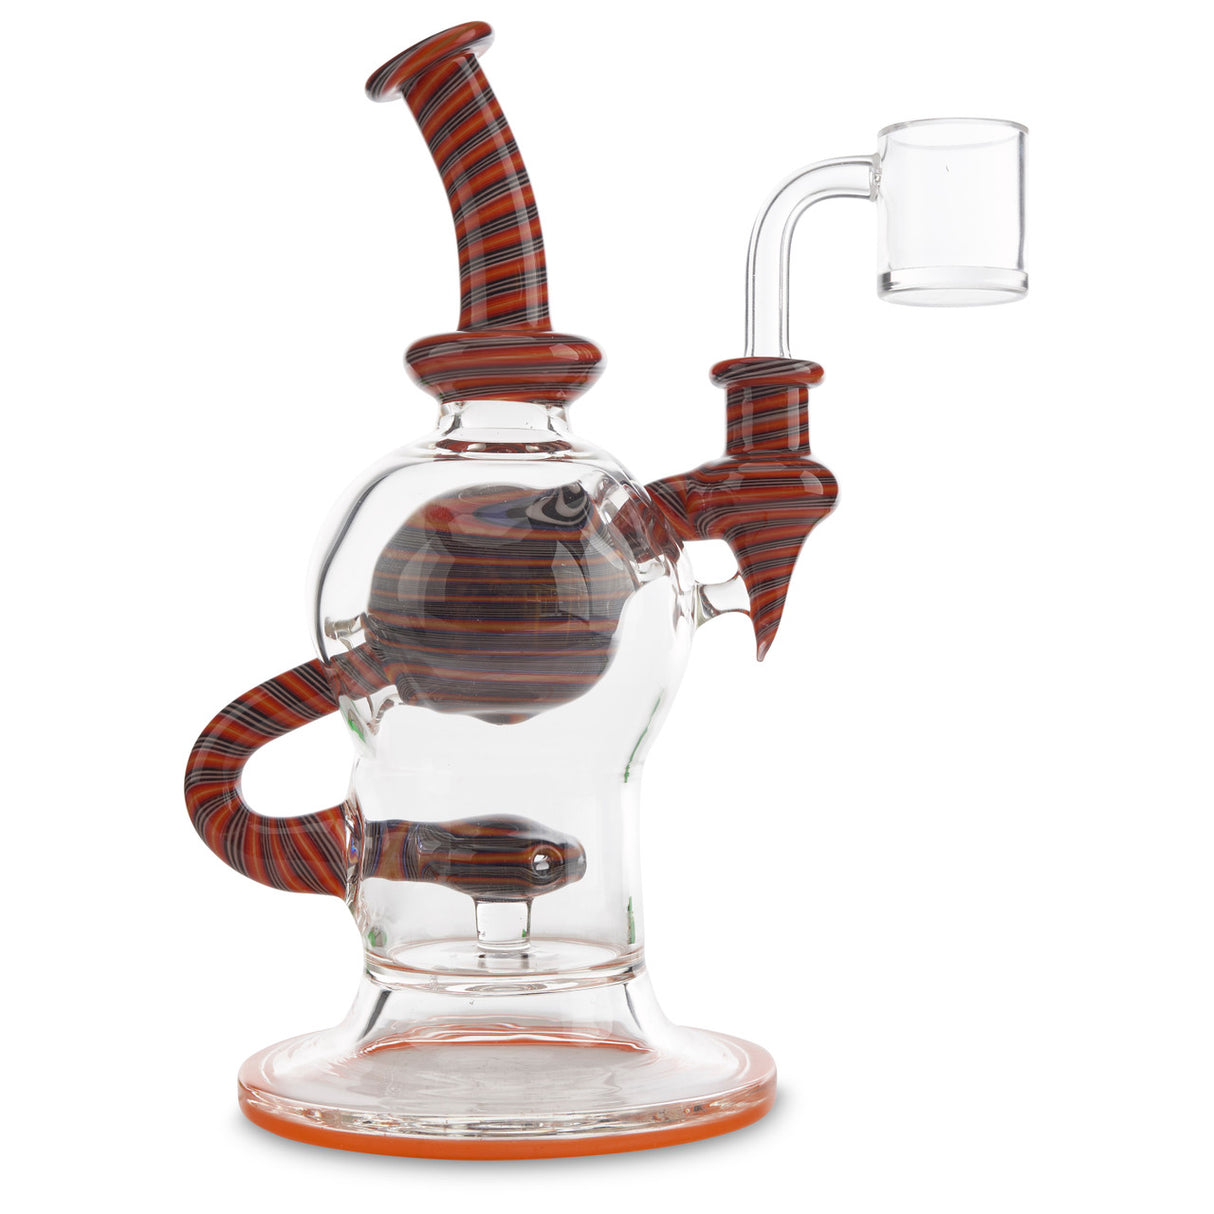 andy g glass ball rig orange and black linework rig for smoking wax